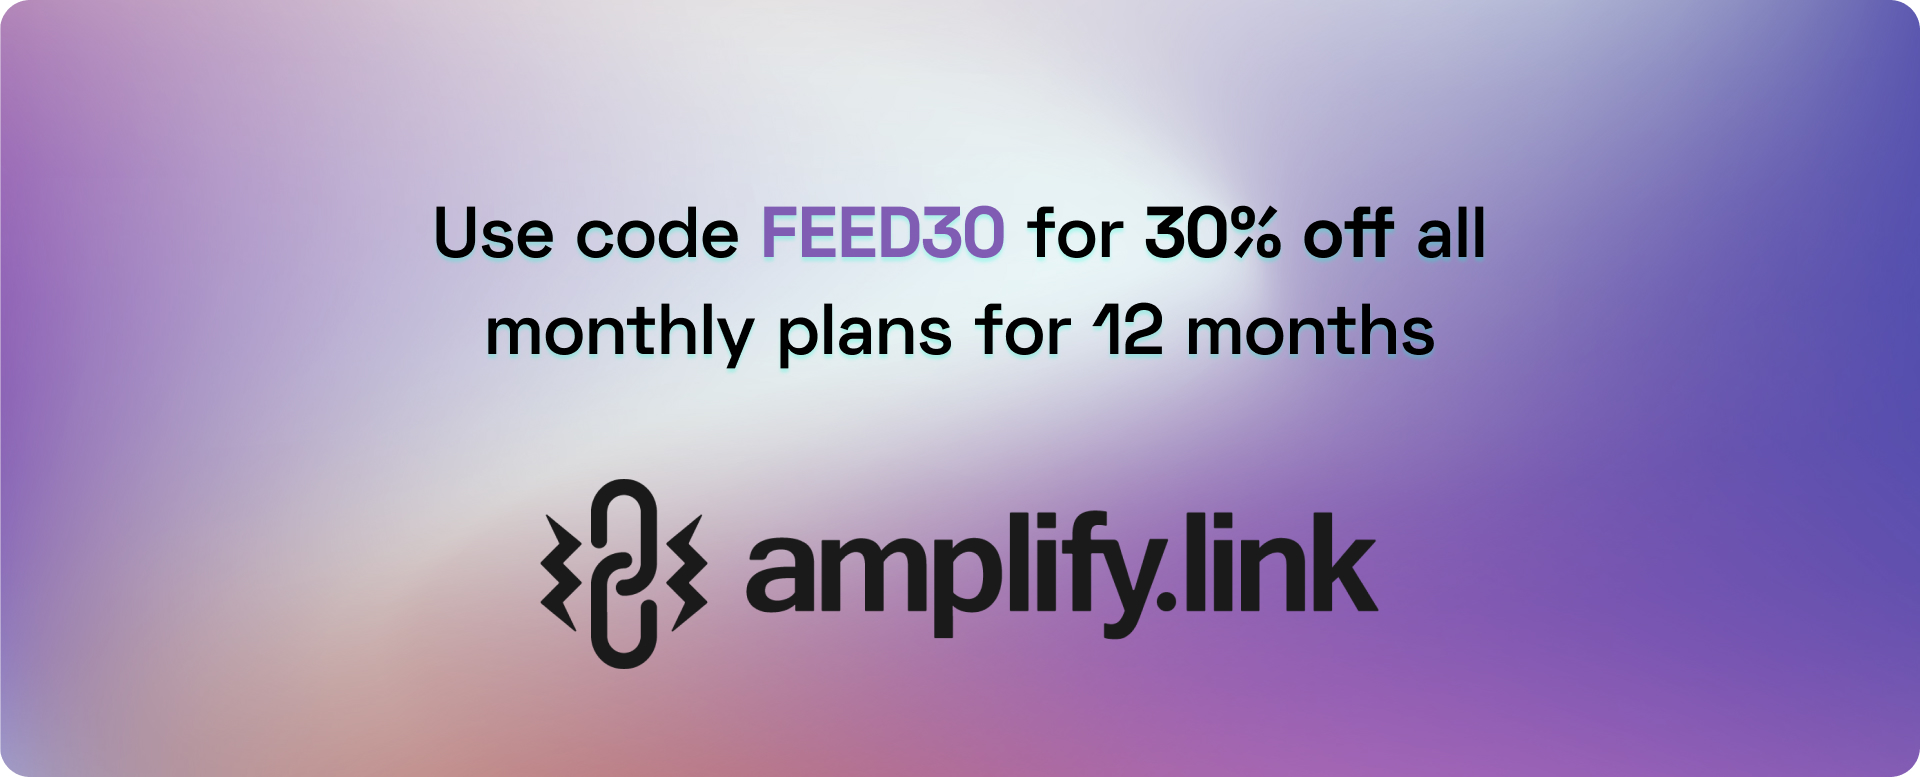 Amplify - 30% off for the Feed community with code FEED30